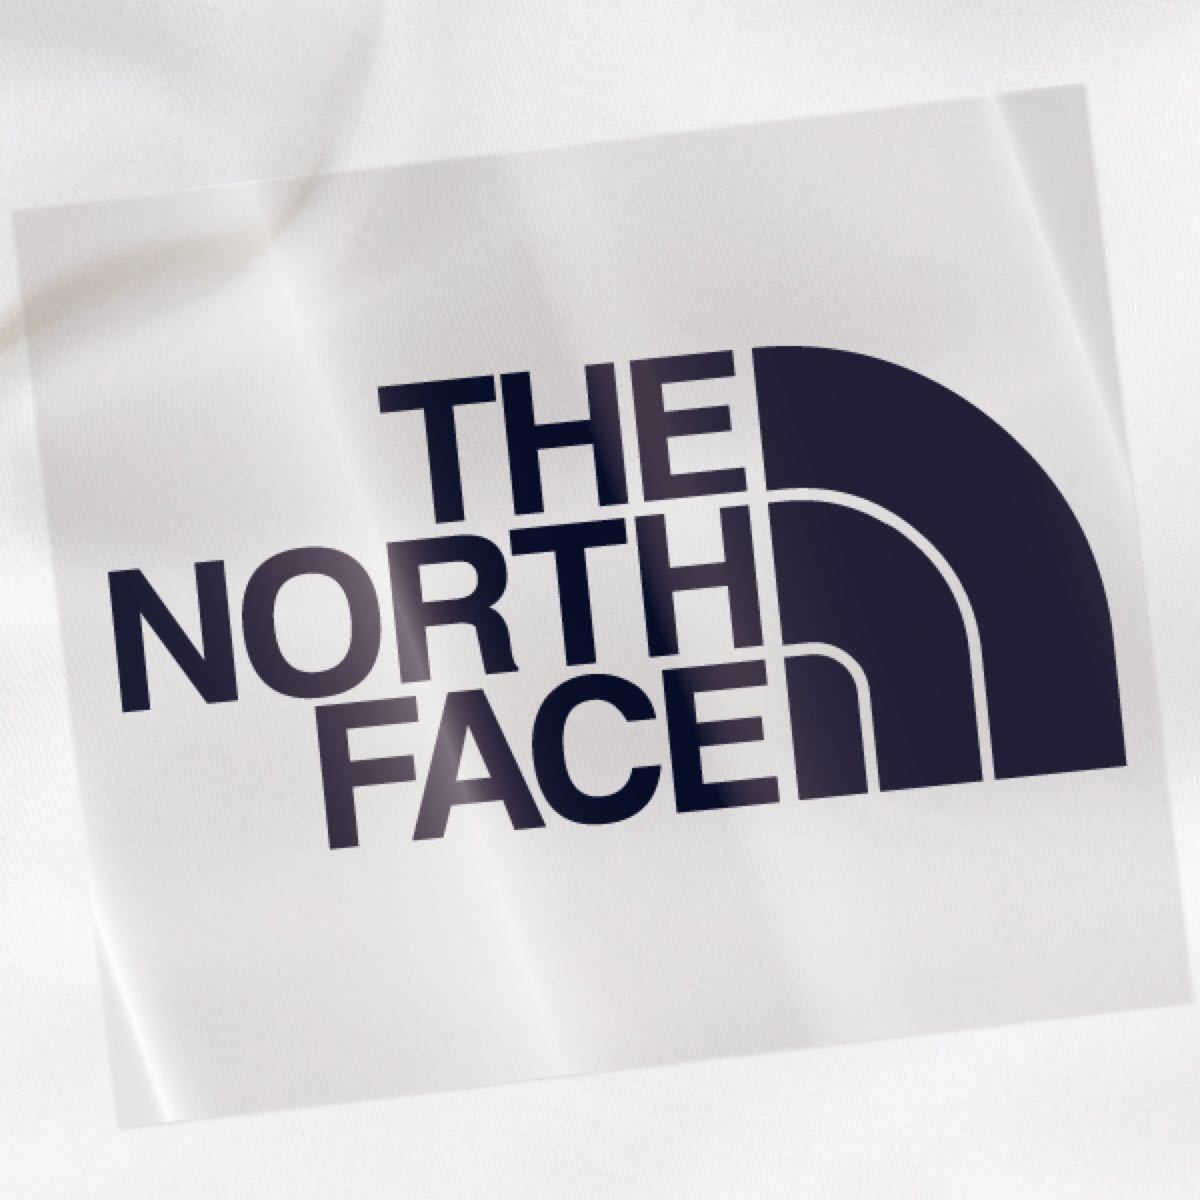 THE NORTH FACE ビッグロゴ【熱転写アイロンシート 紺】即購入可